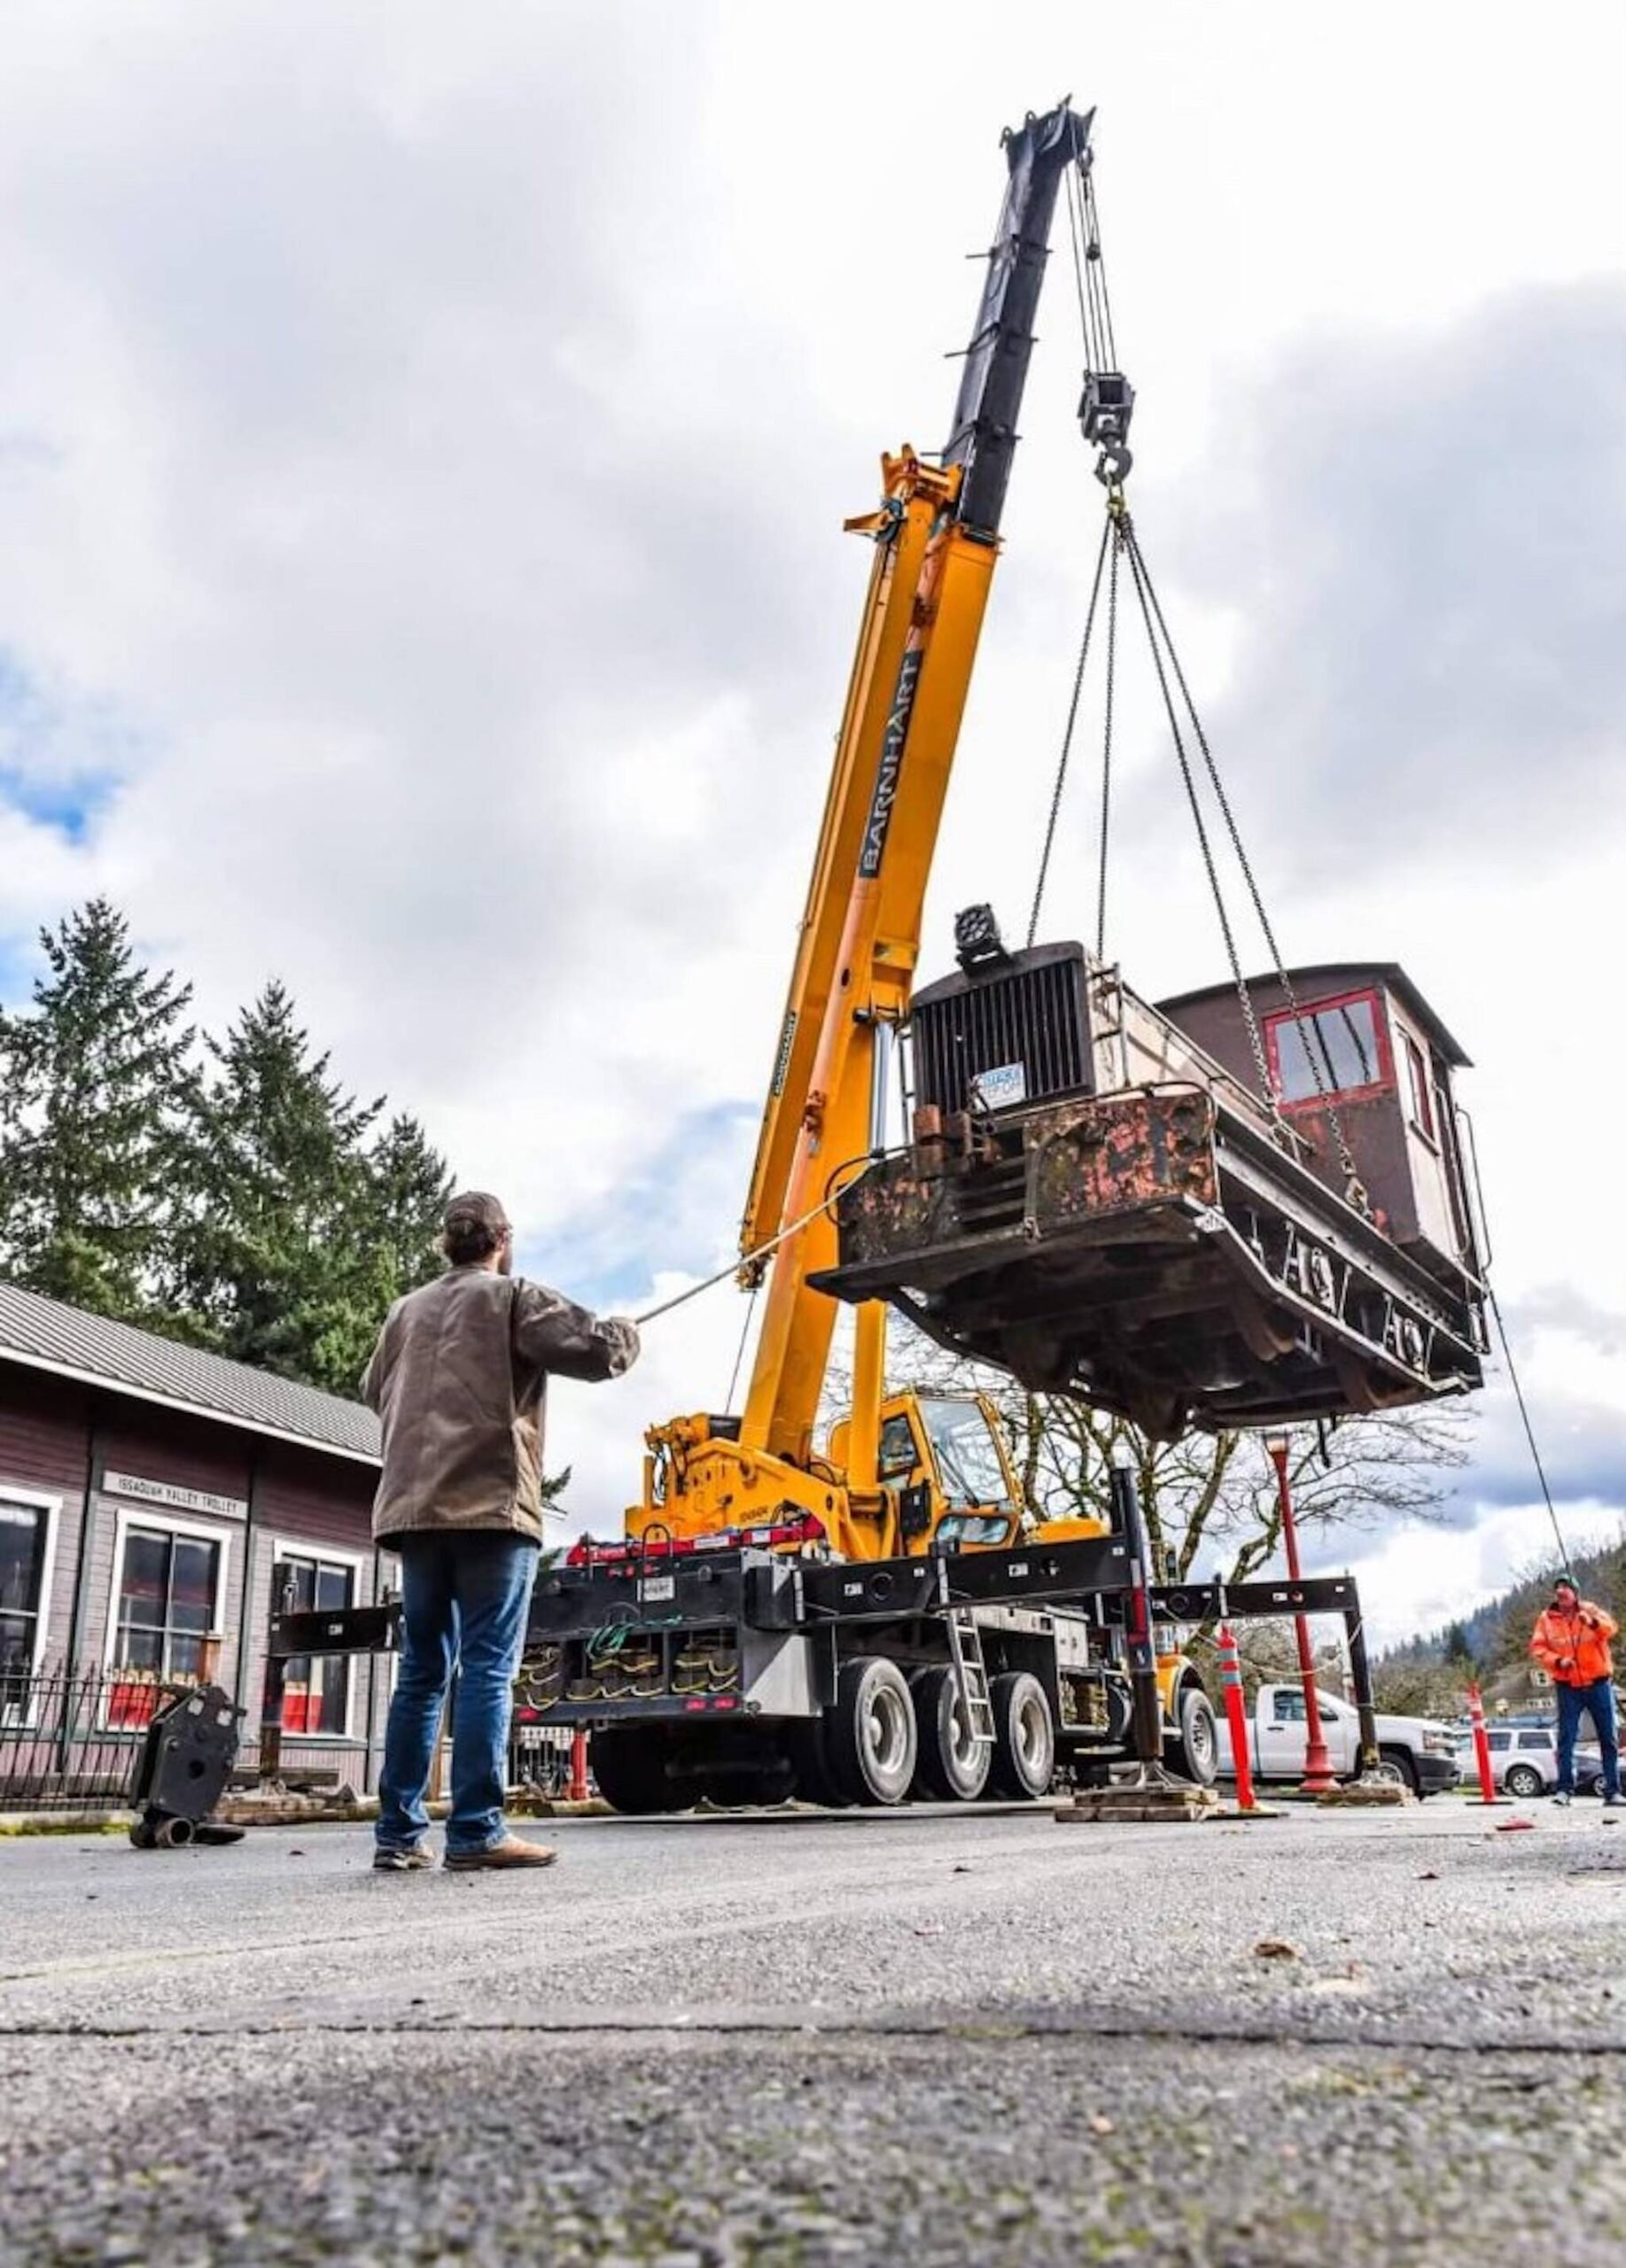 Spin Cycle Photography - Tyler Elliott
According to Tim Quigg, who helped bring the 99-year-old locomotive to Aberdeen, the workers tried to lift it with a 40-ton crane. The crane wasn’t strong enough, so they had to bring in a 60-ton crane to do the job in Issaquah.